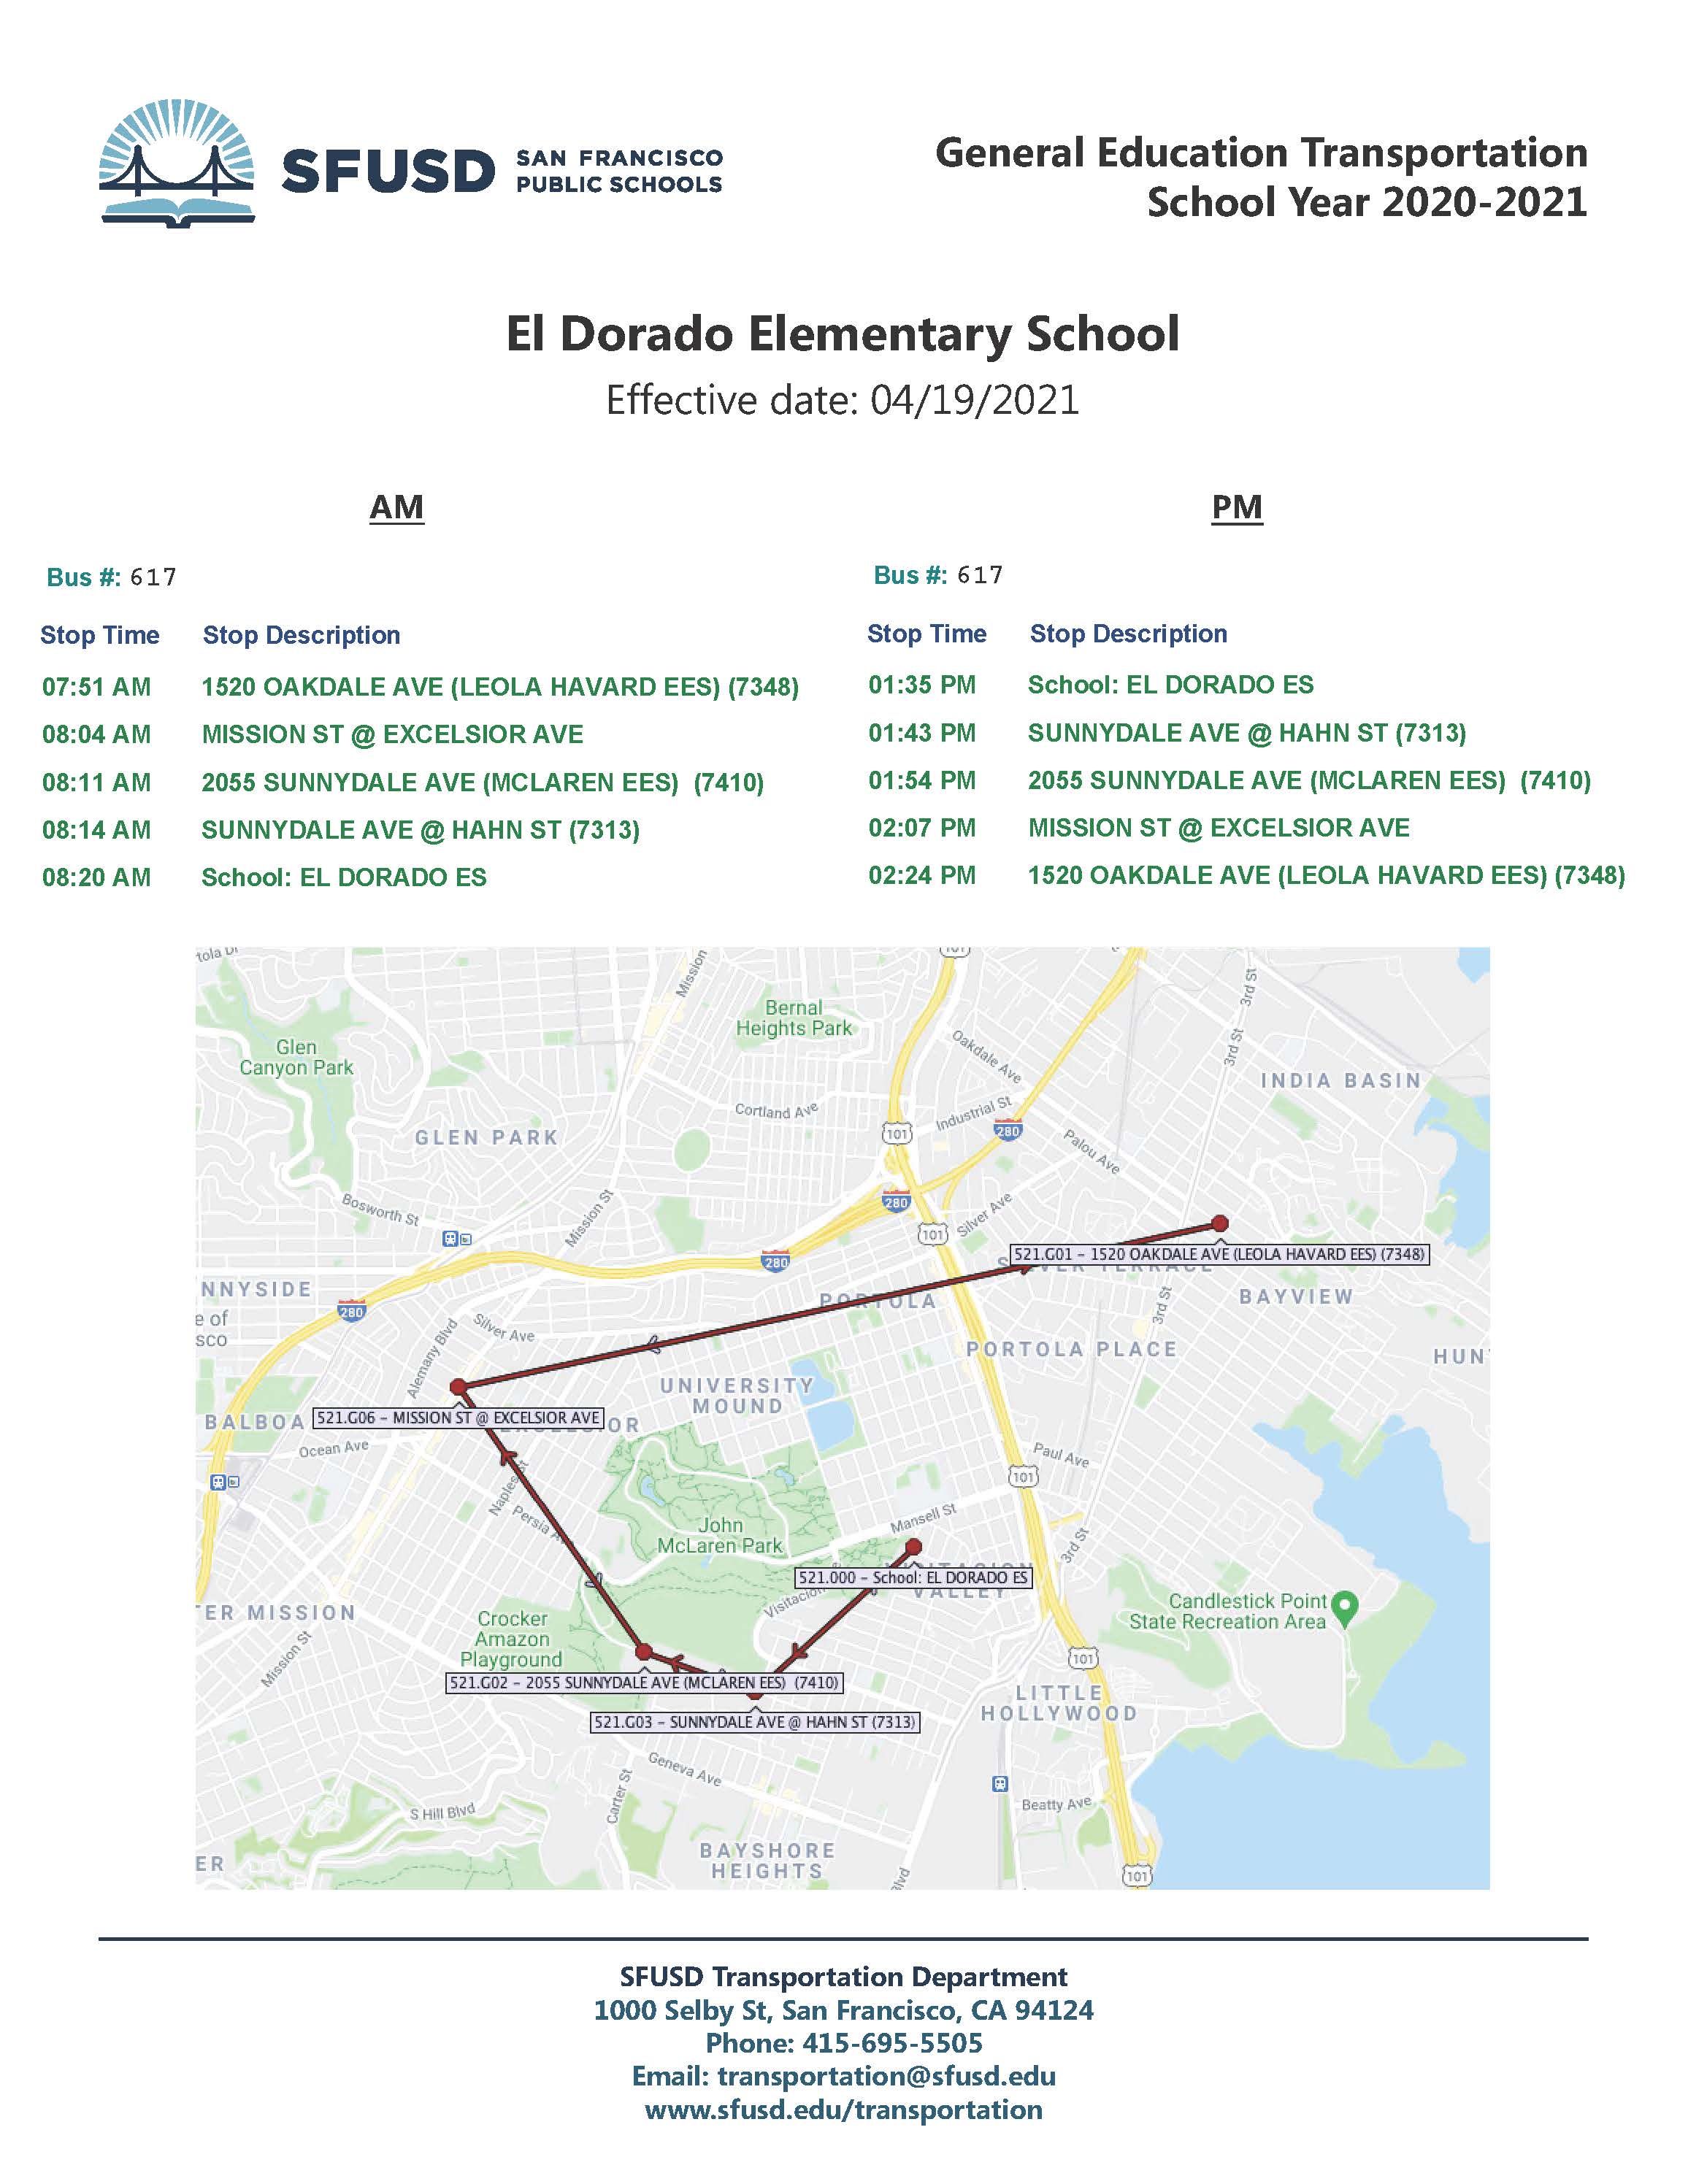 Picture of the pdf file provided by SFUSD with bus schedules for El Dorado